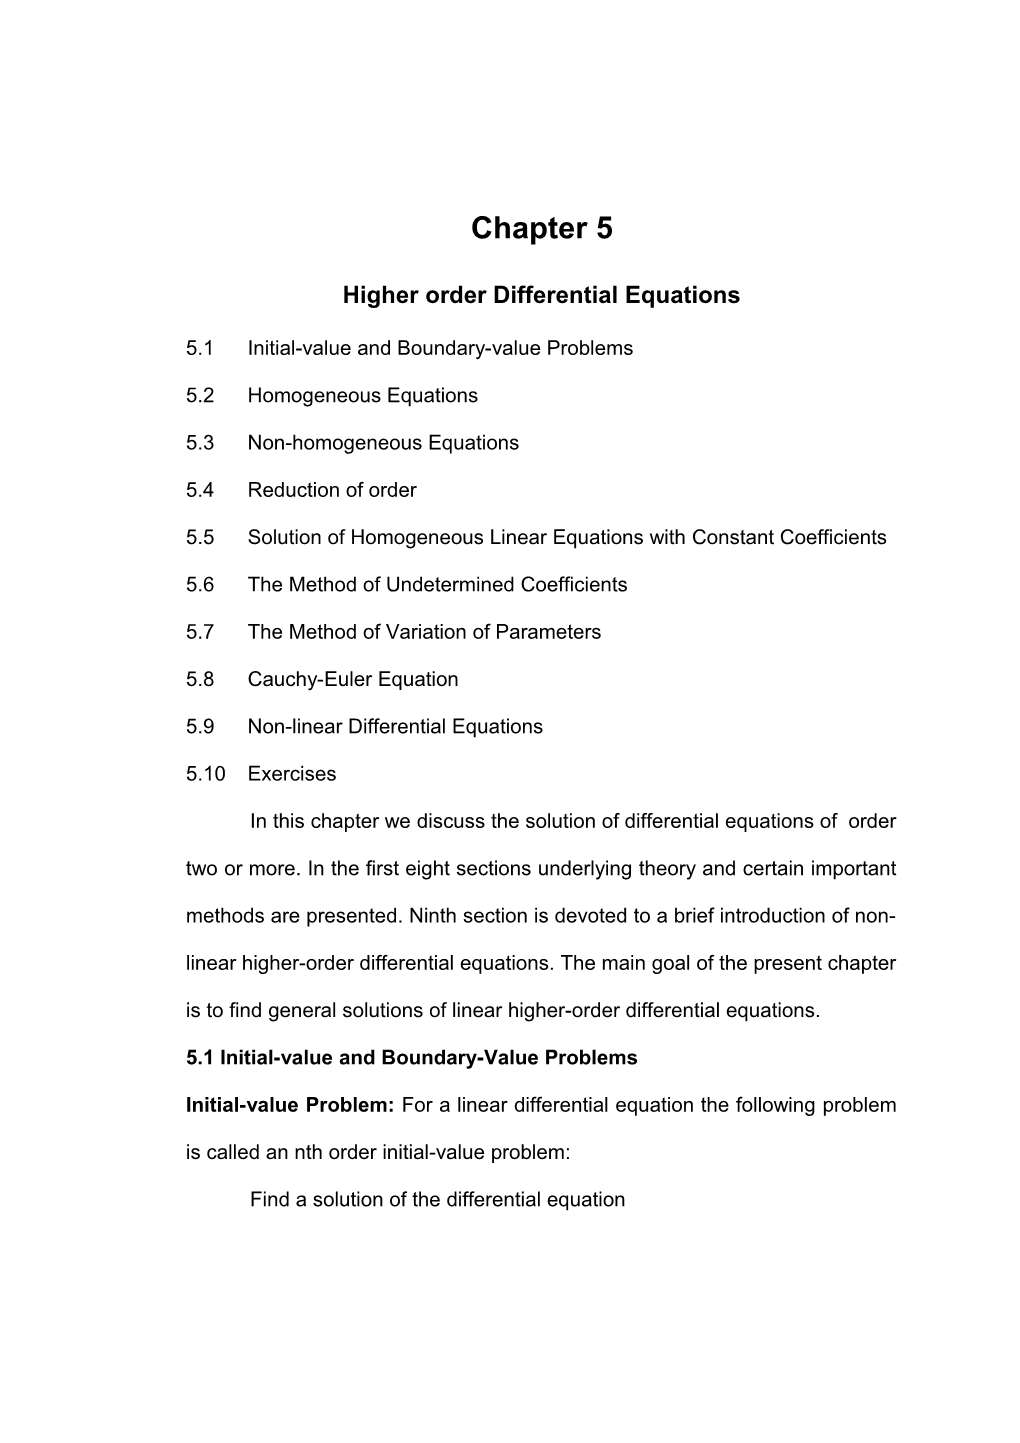 Higher Order Differential Equations